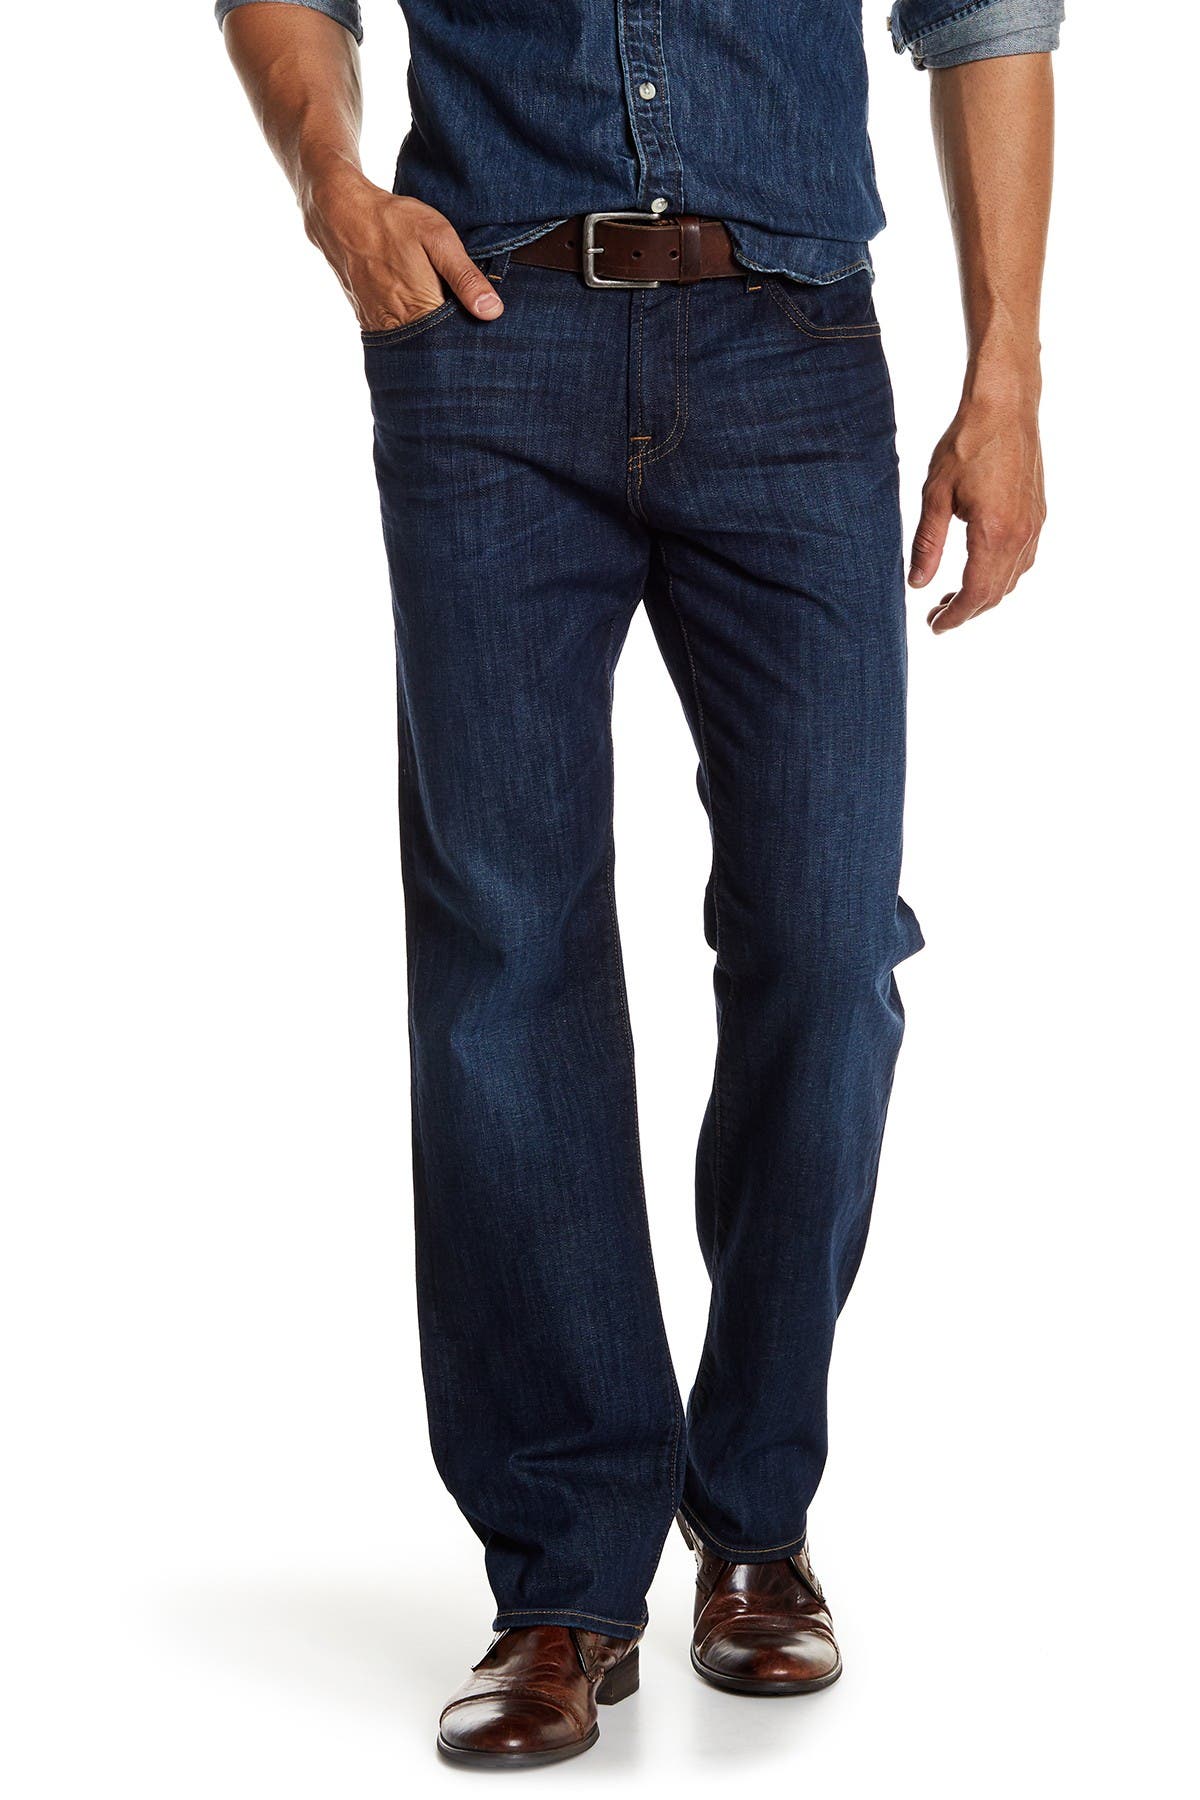 7 For All Mankind Mens Austyn Relaxed Fit Jeans Chrisfield 30W x 33L